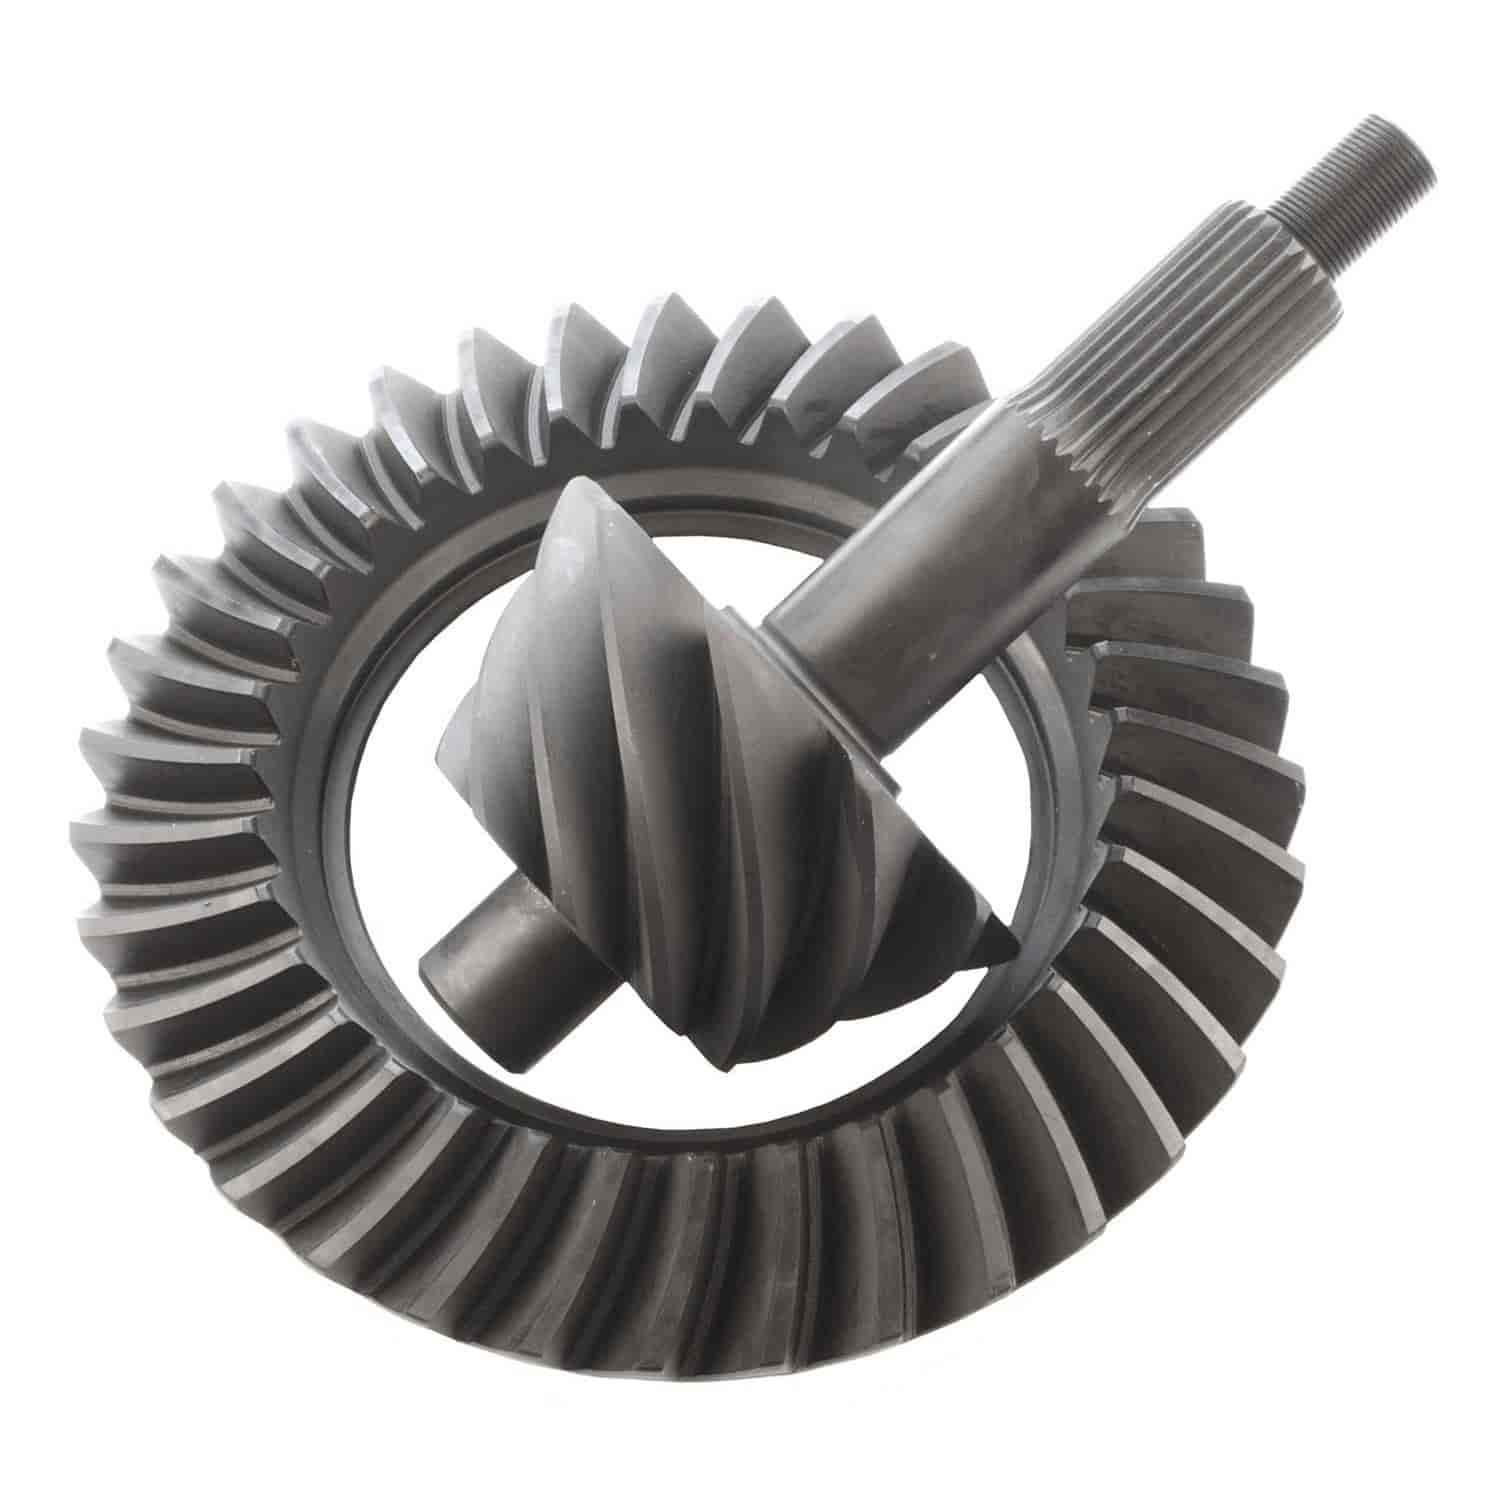 Excel Ring & Pinion Gear Set Ford 9" Ratio: 3.50